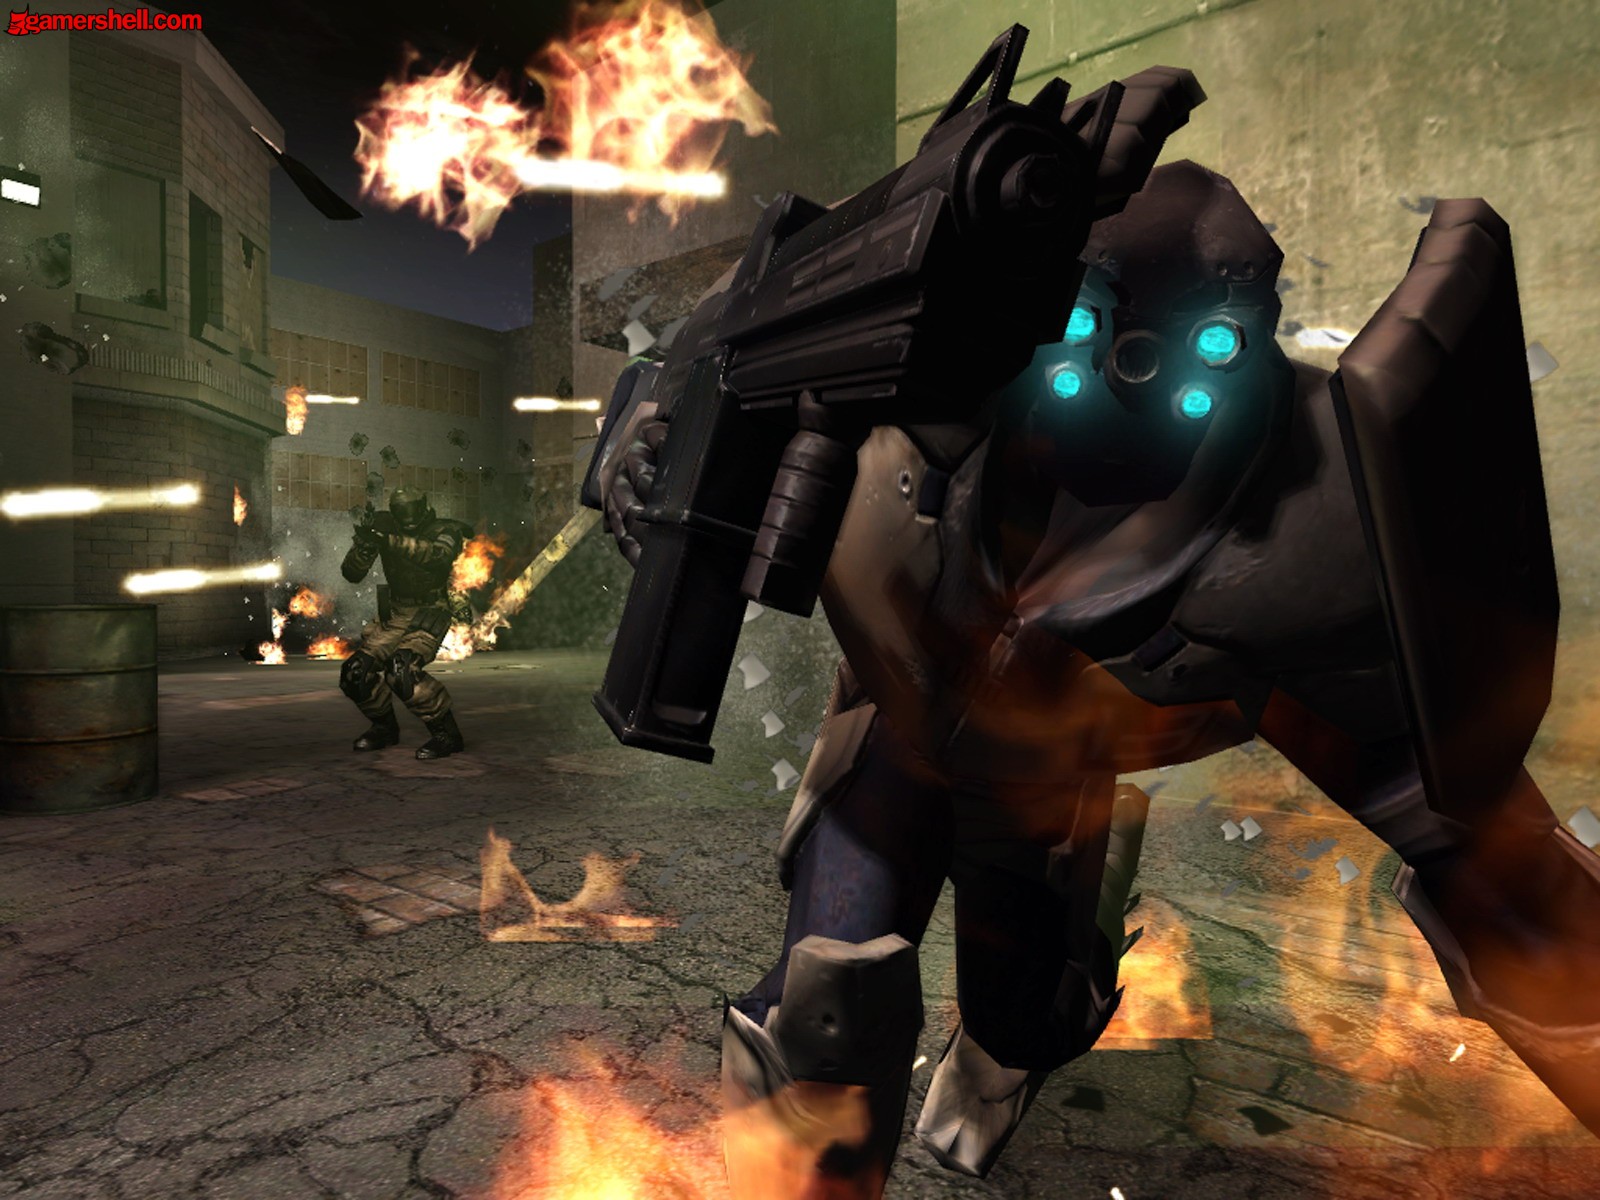 F.E.A.R. video game scene featuring a dark soldier battling a monster near a fiery explosion.